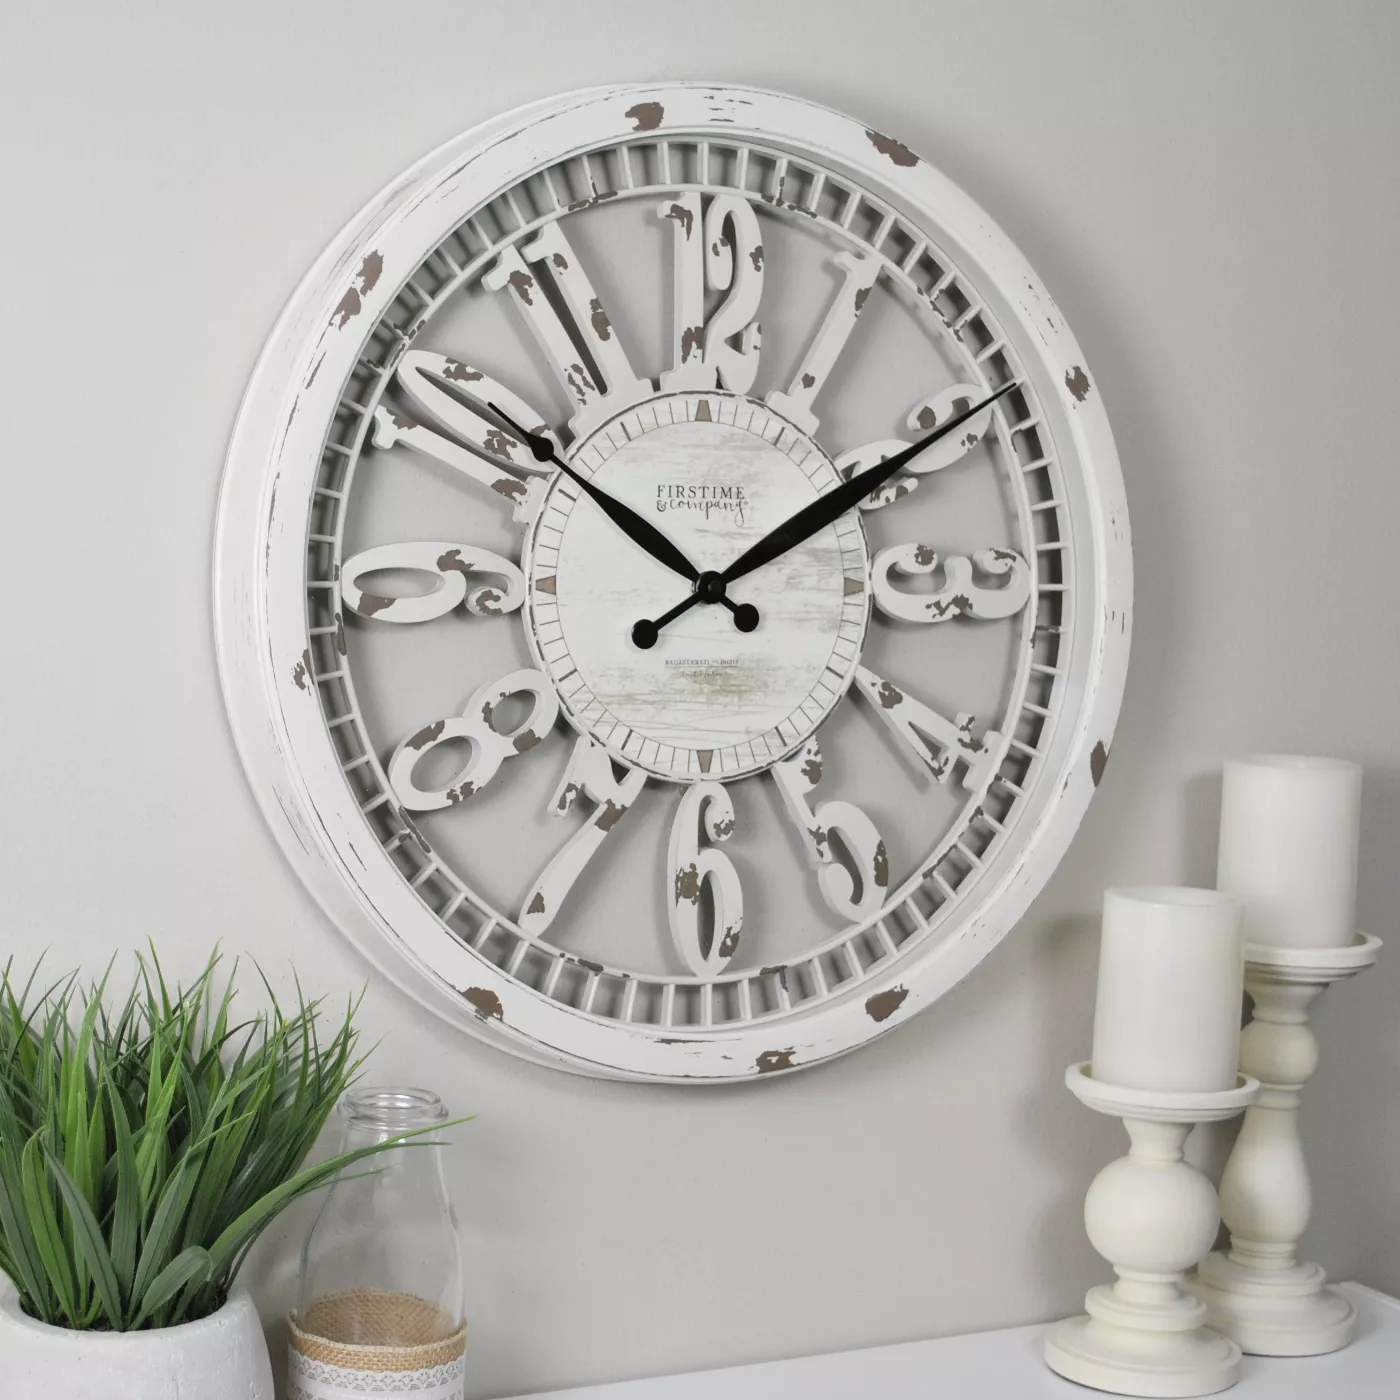 20" Whitney Farmhouse Wall Clock Antique Cream - FirsTime & Co. - image 1 of 7